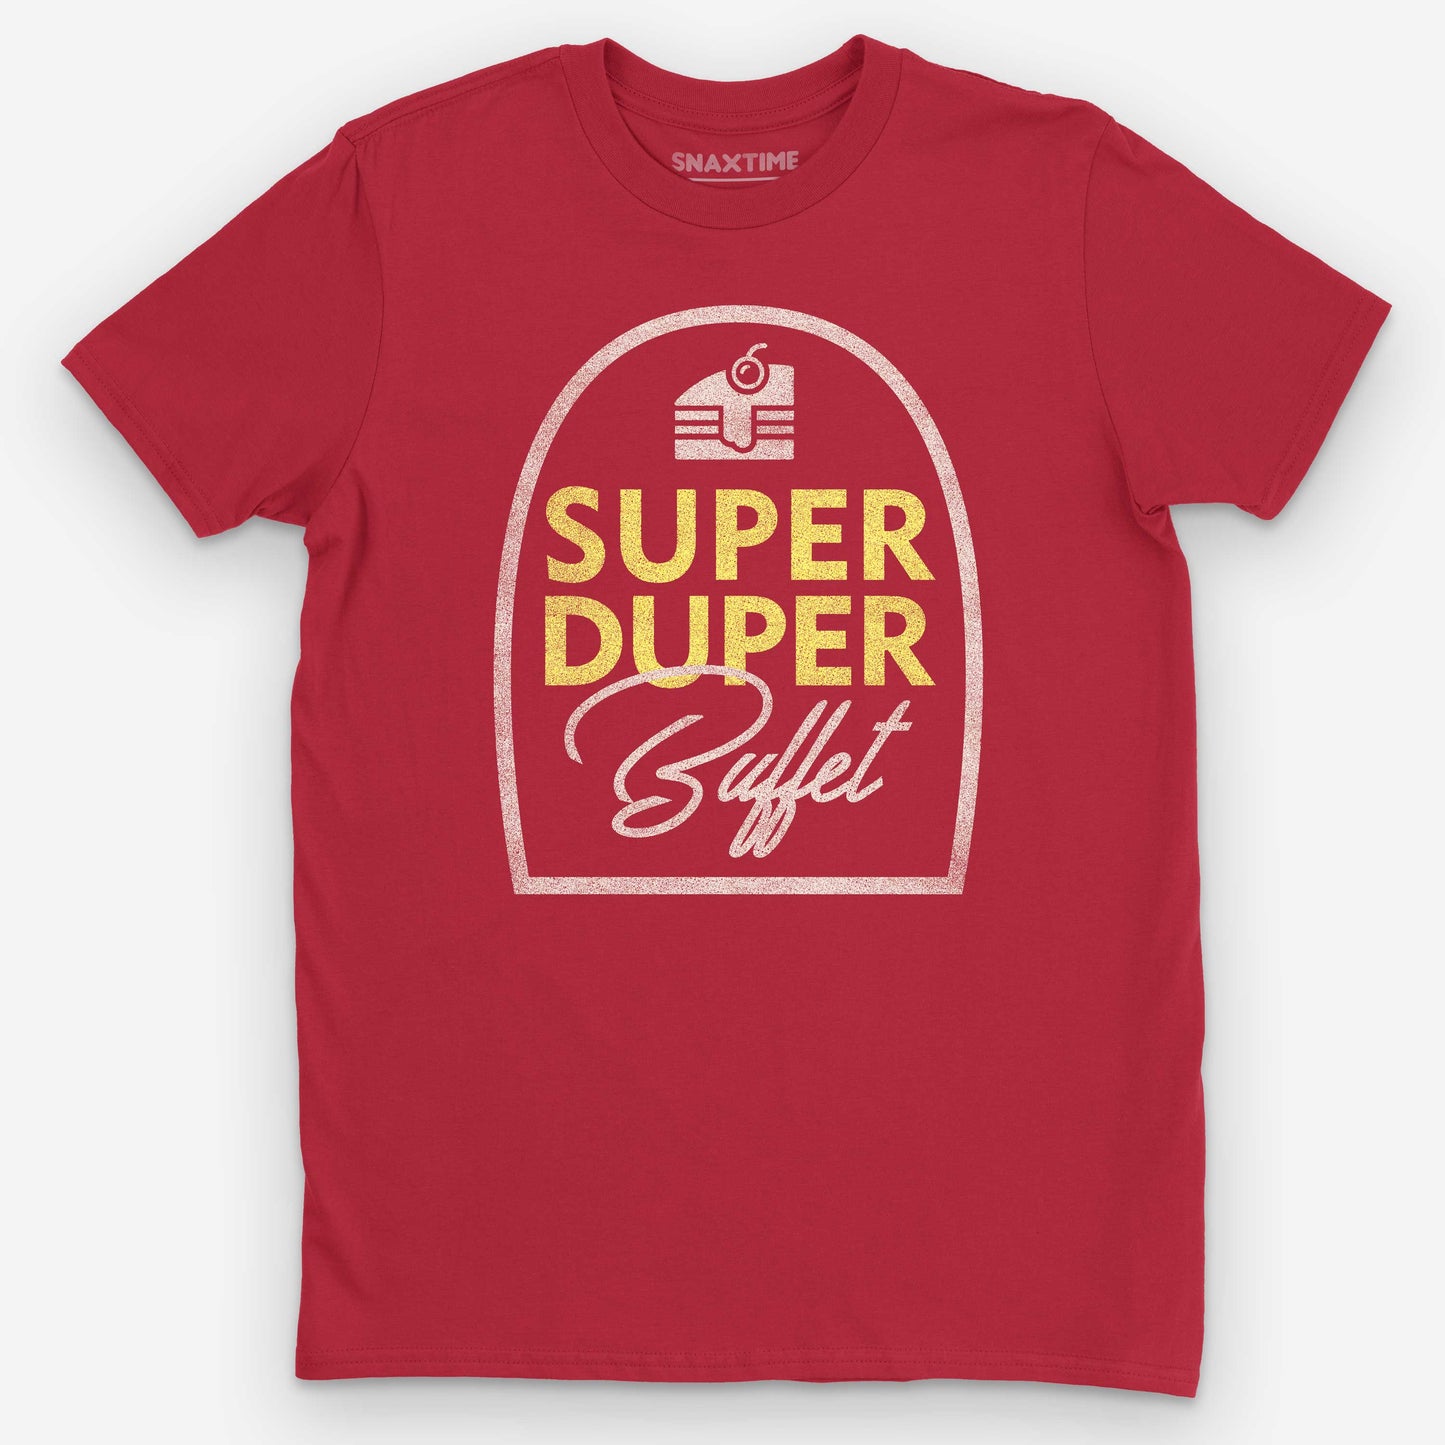 Red Super Duper Buffet Graphic T-Shirt by Snaxtime